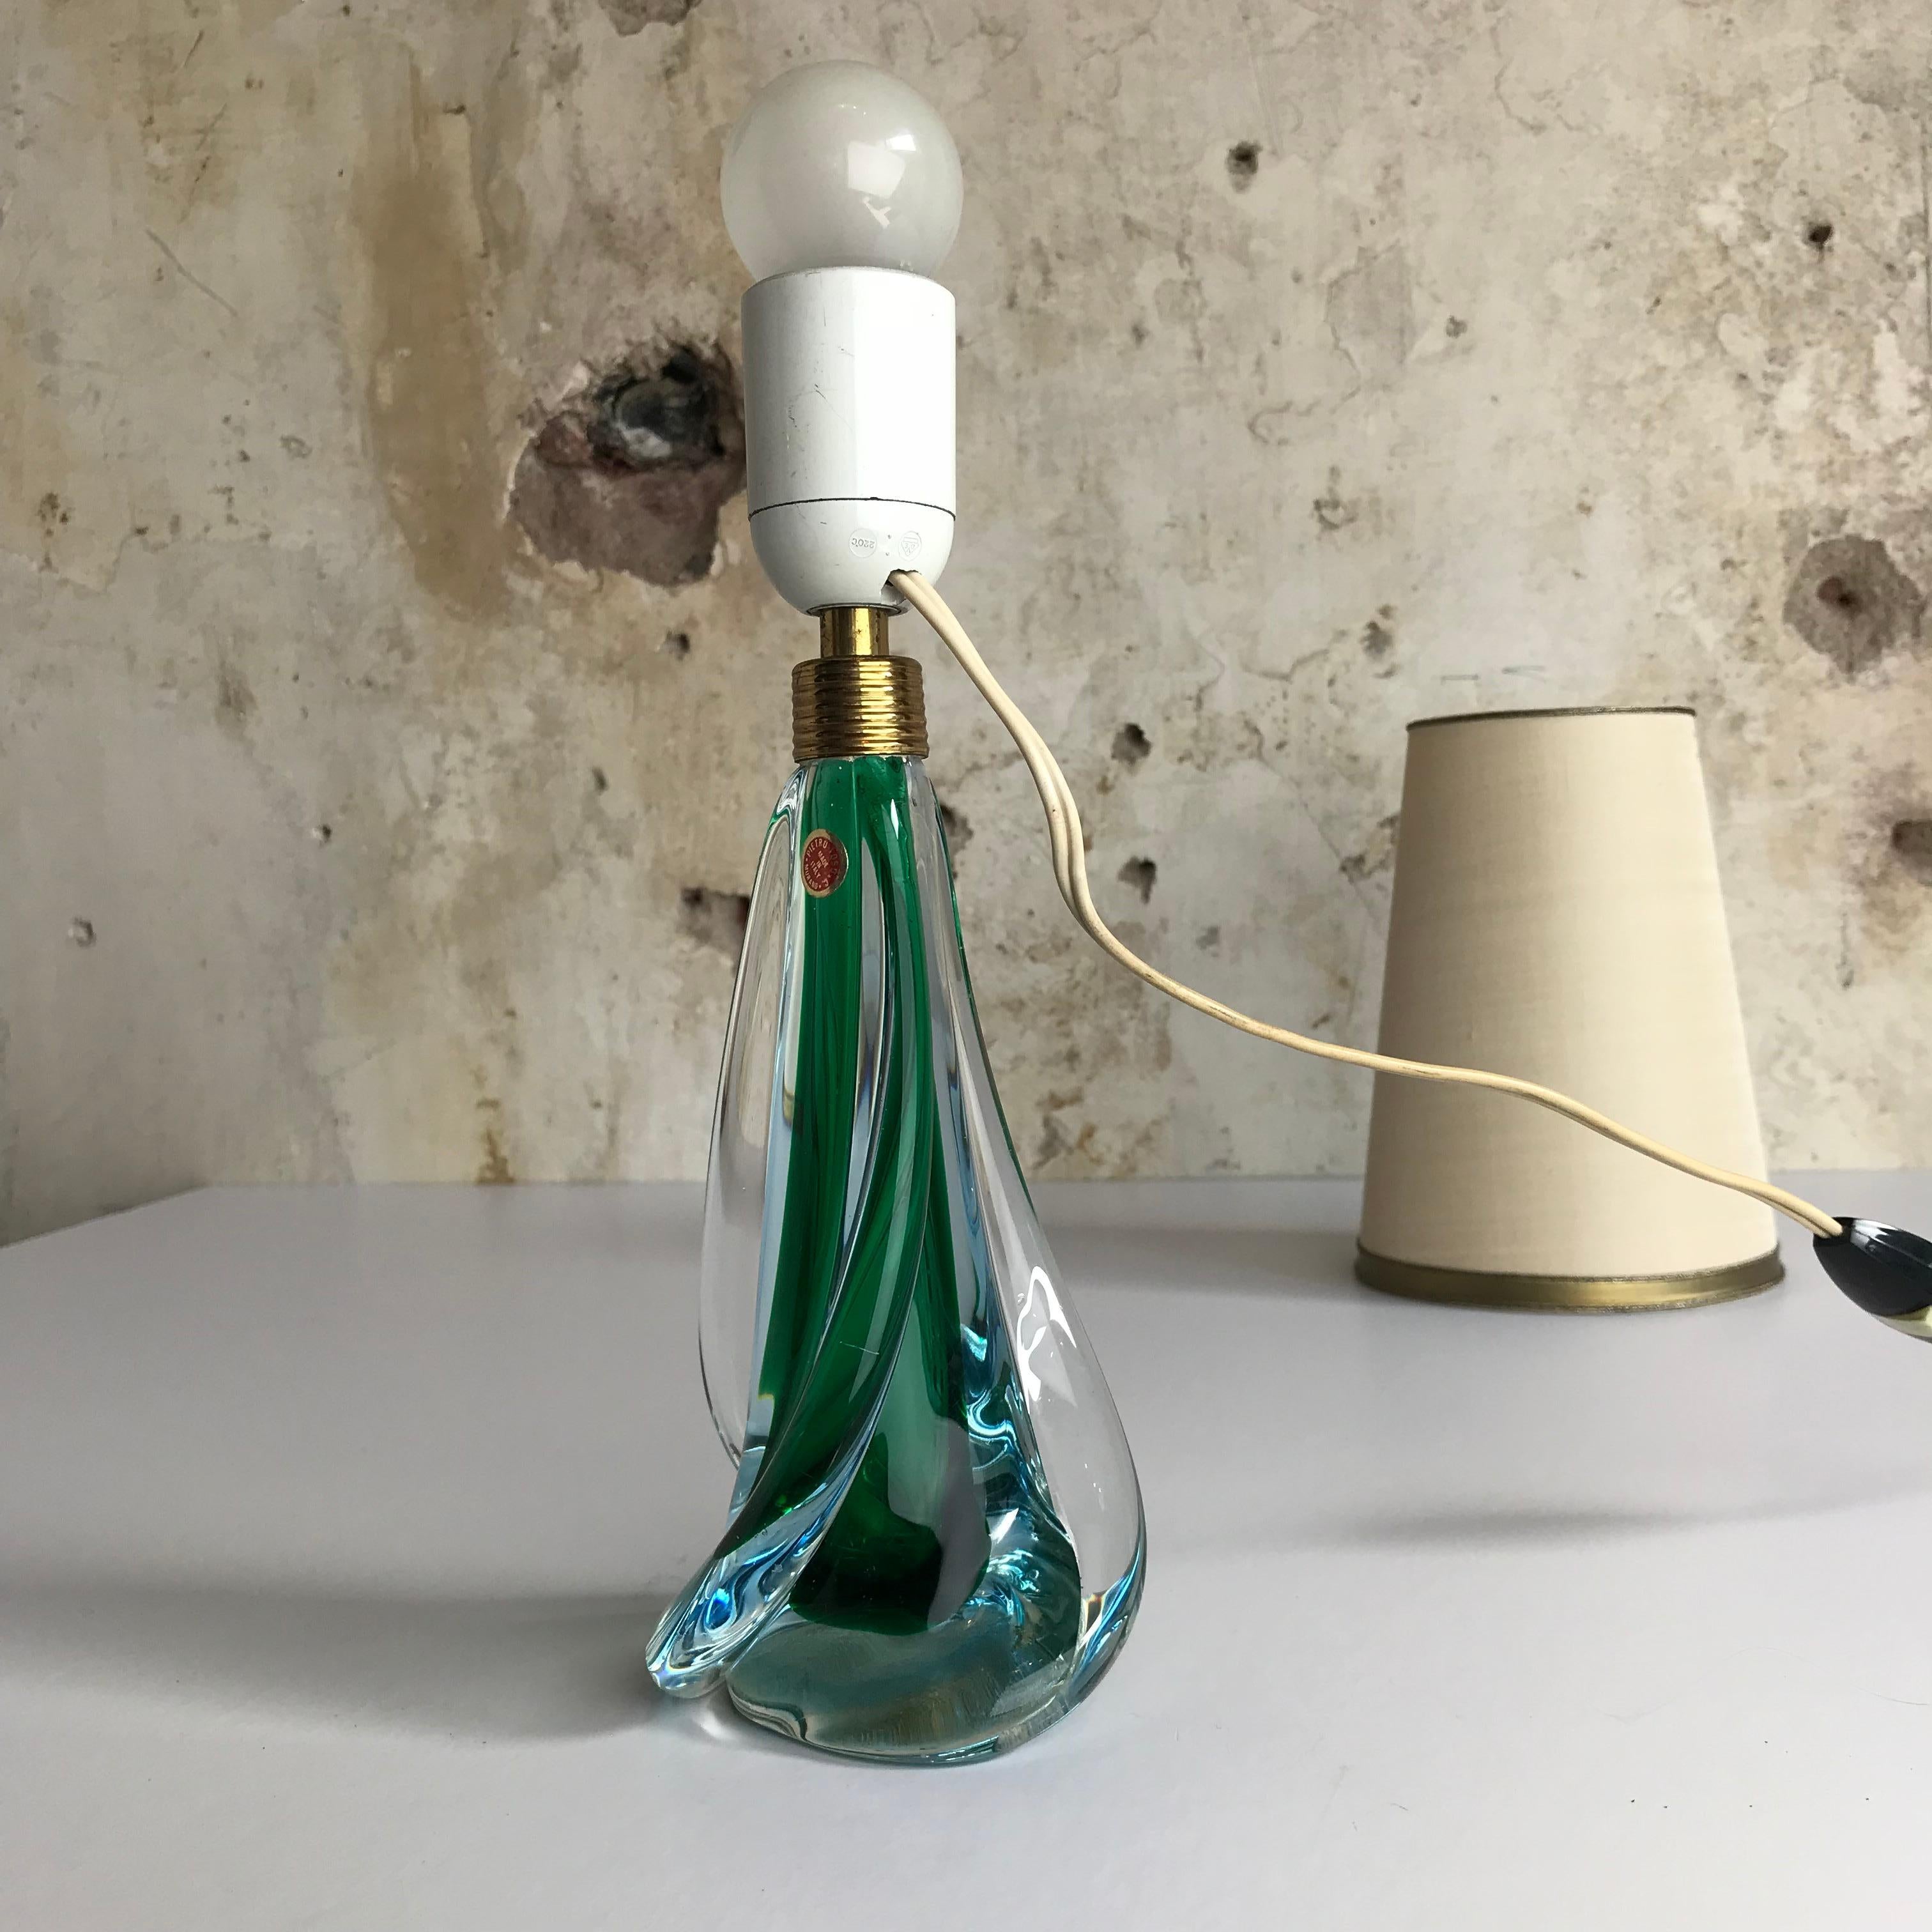 A rare 1950s Italian art glass table lamp, crafted of Murano glass by Pietro Toso. It is in excellent vintage condition with no chips, cracks or bruises. Original shade included.


Period: 1950-1960.

Measures: Height with shade: 37 cm
Height